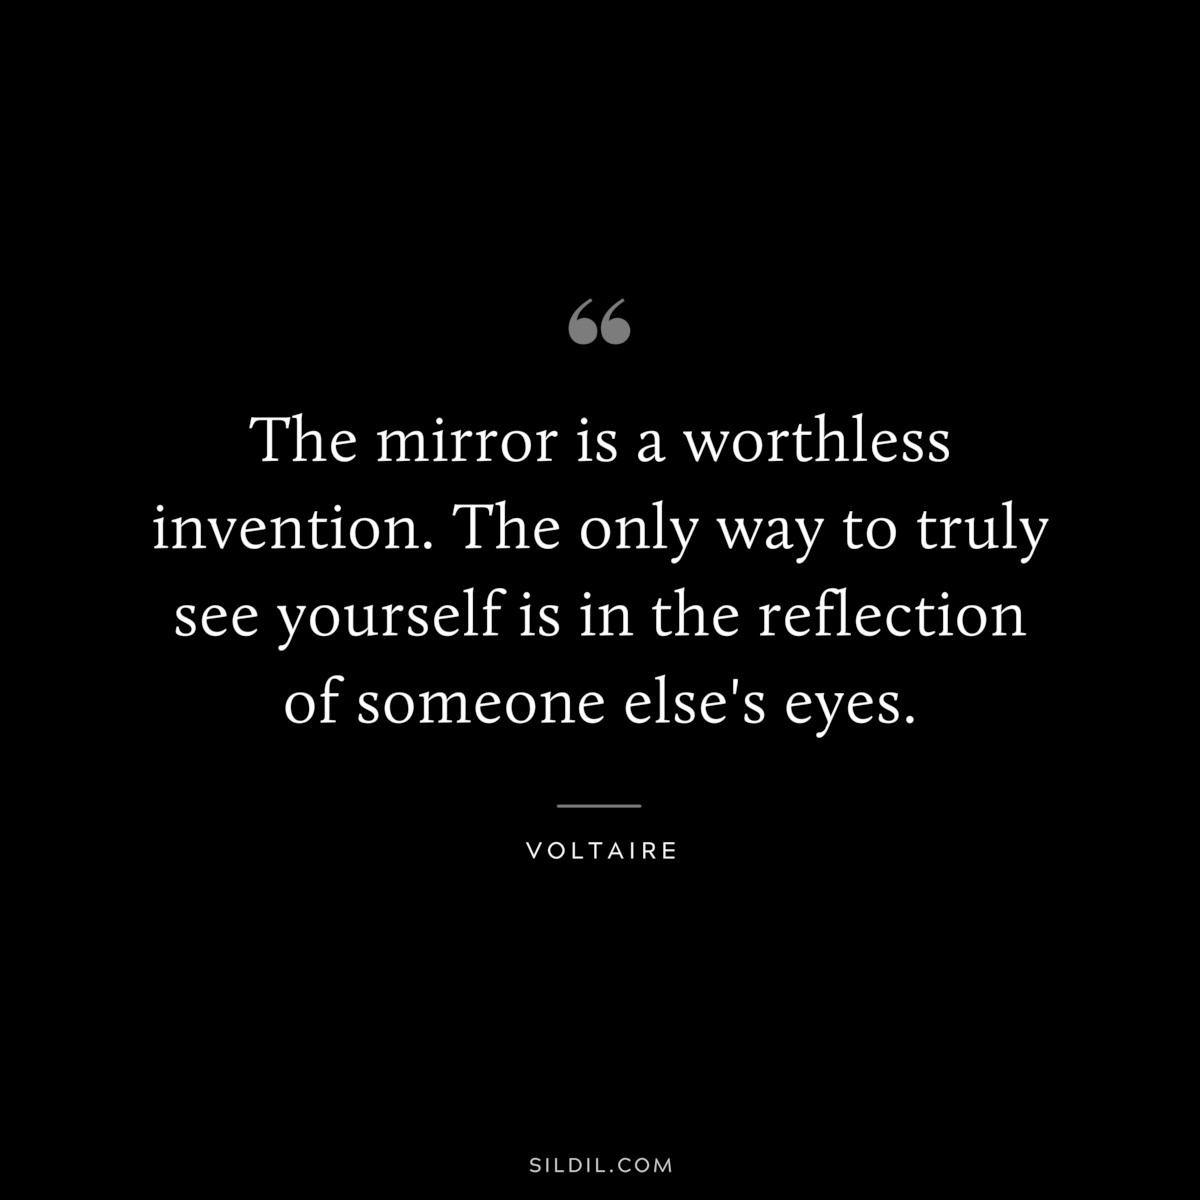 The mirror is a worthless invention. The only way to truly see yourself is in the reflection of someone else's eyes. ― Voltaire